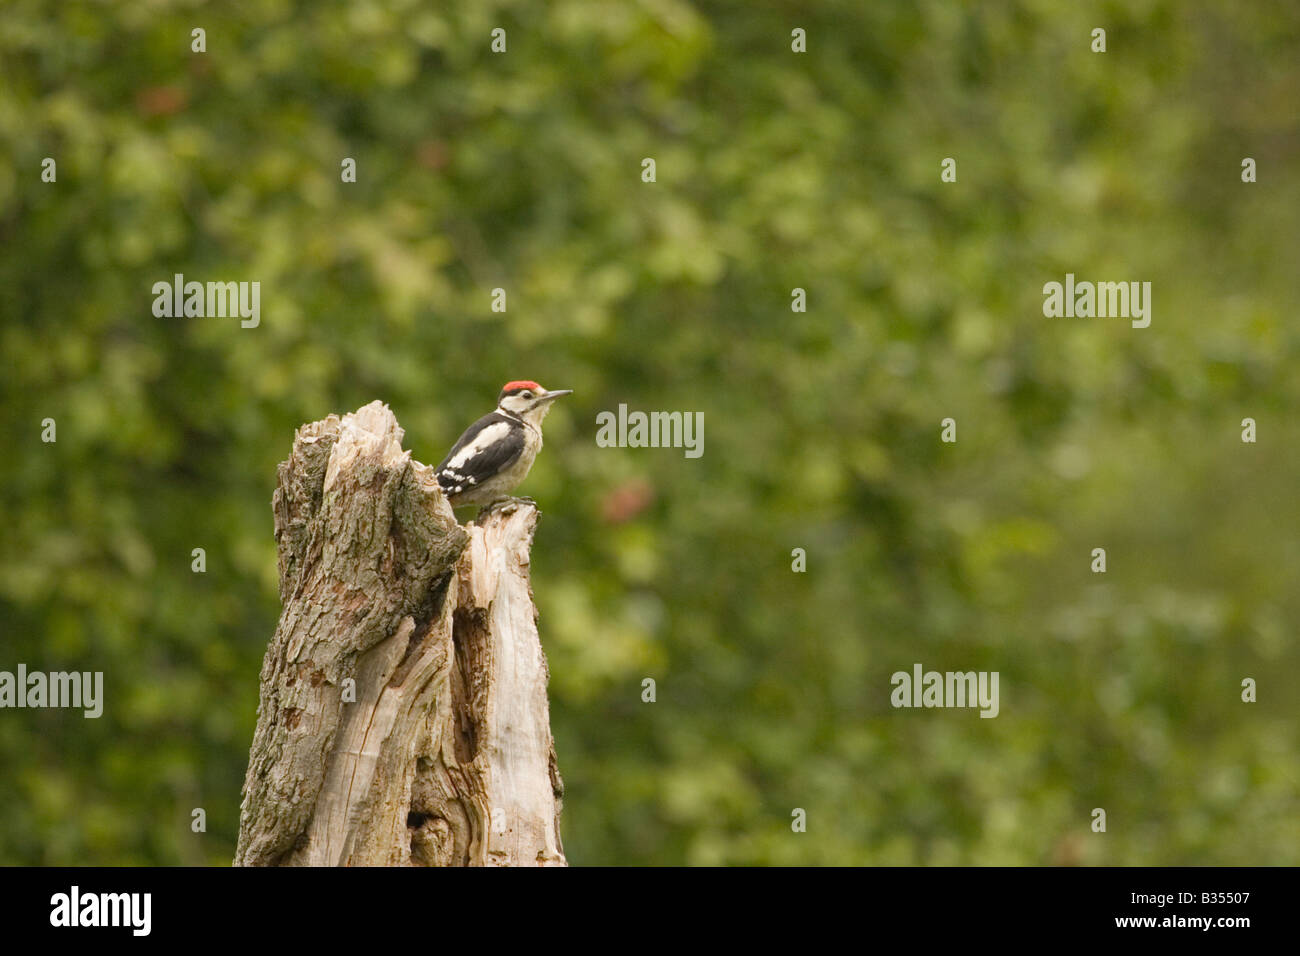 Greater Spotted Woodpecker on tree stump, England, UK Stock Photo